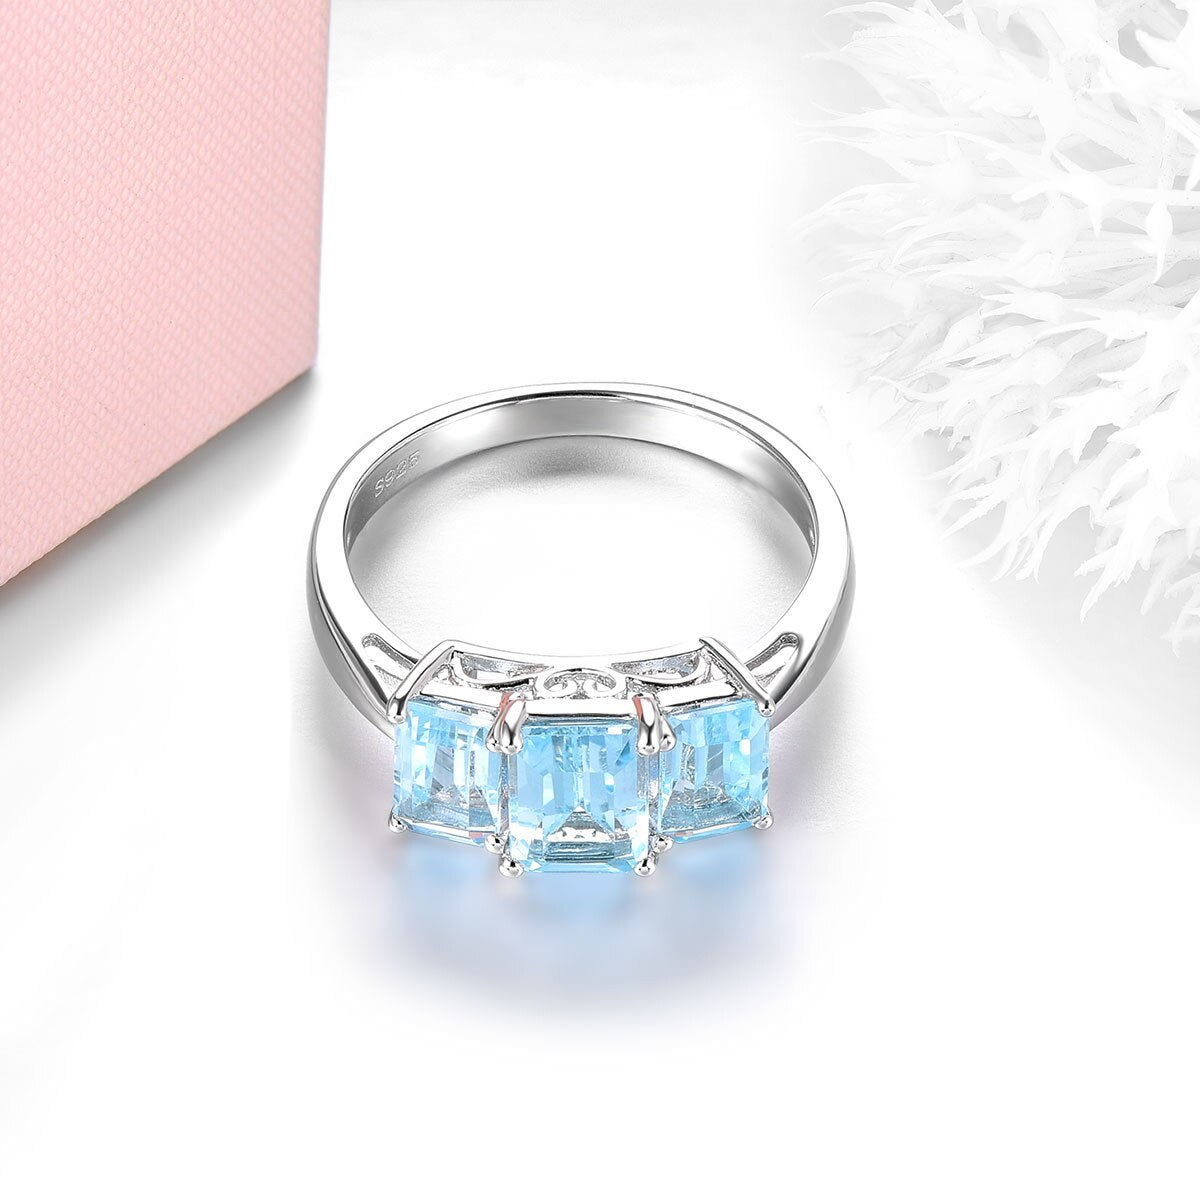 Natural Blue Topaz Sterling Silver Rings 2.5 Carats Genuine Sky Blue Topaz Women Classic Simple Design Jewelrys S925 Gifts